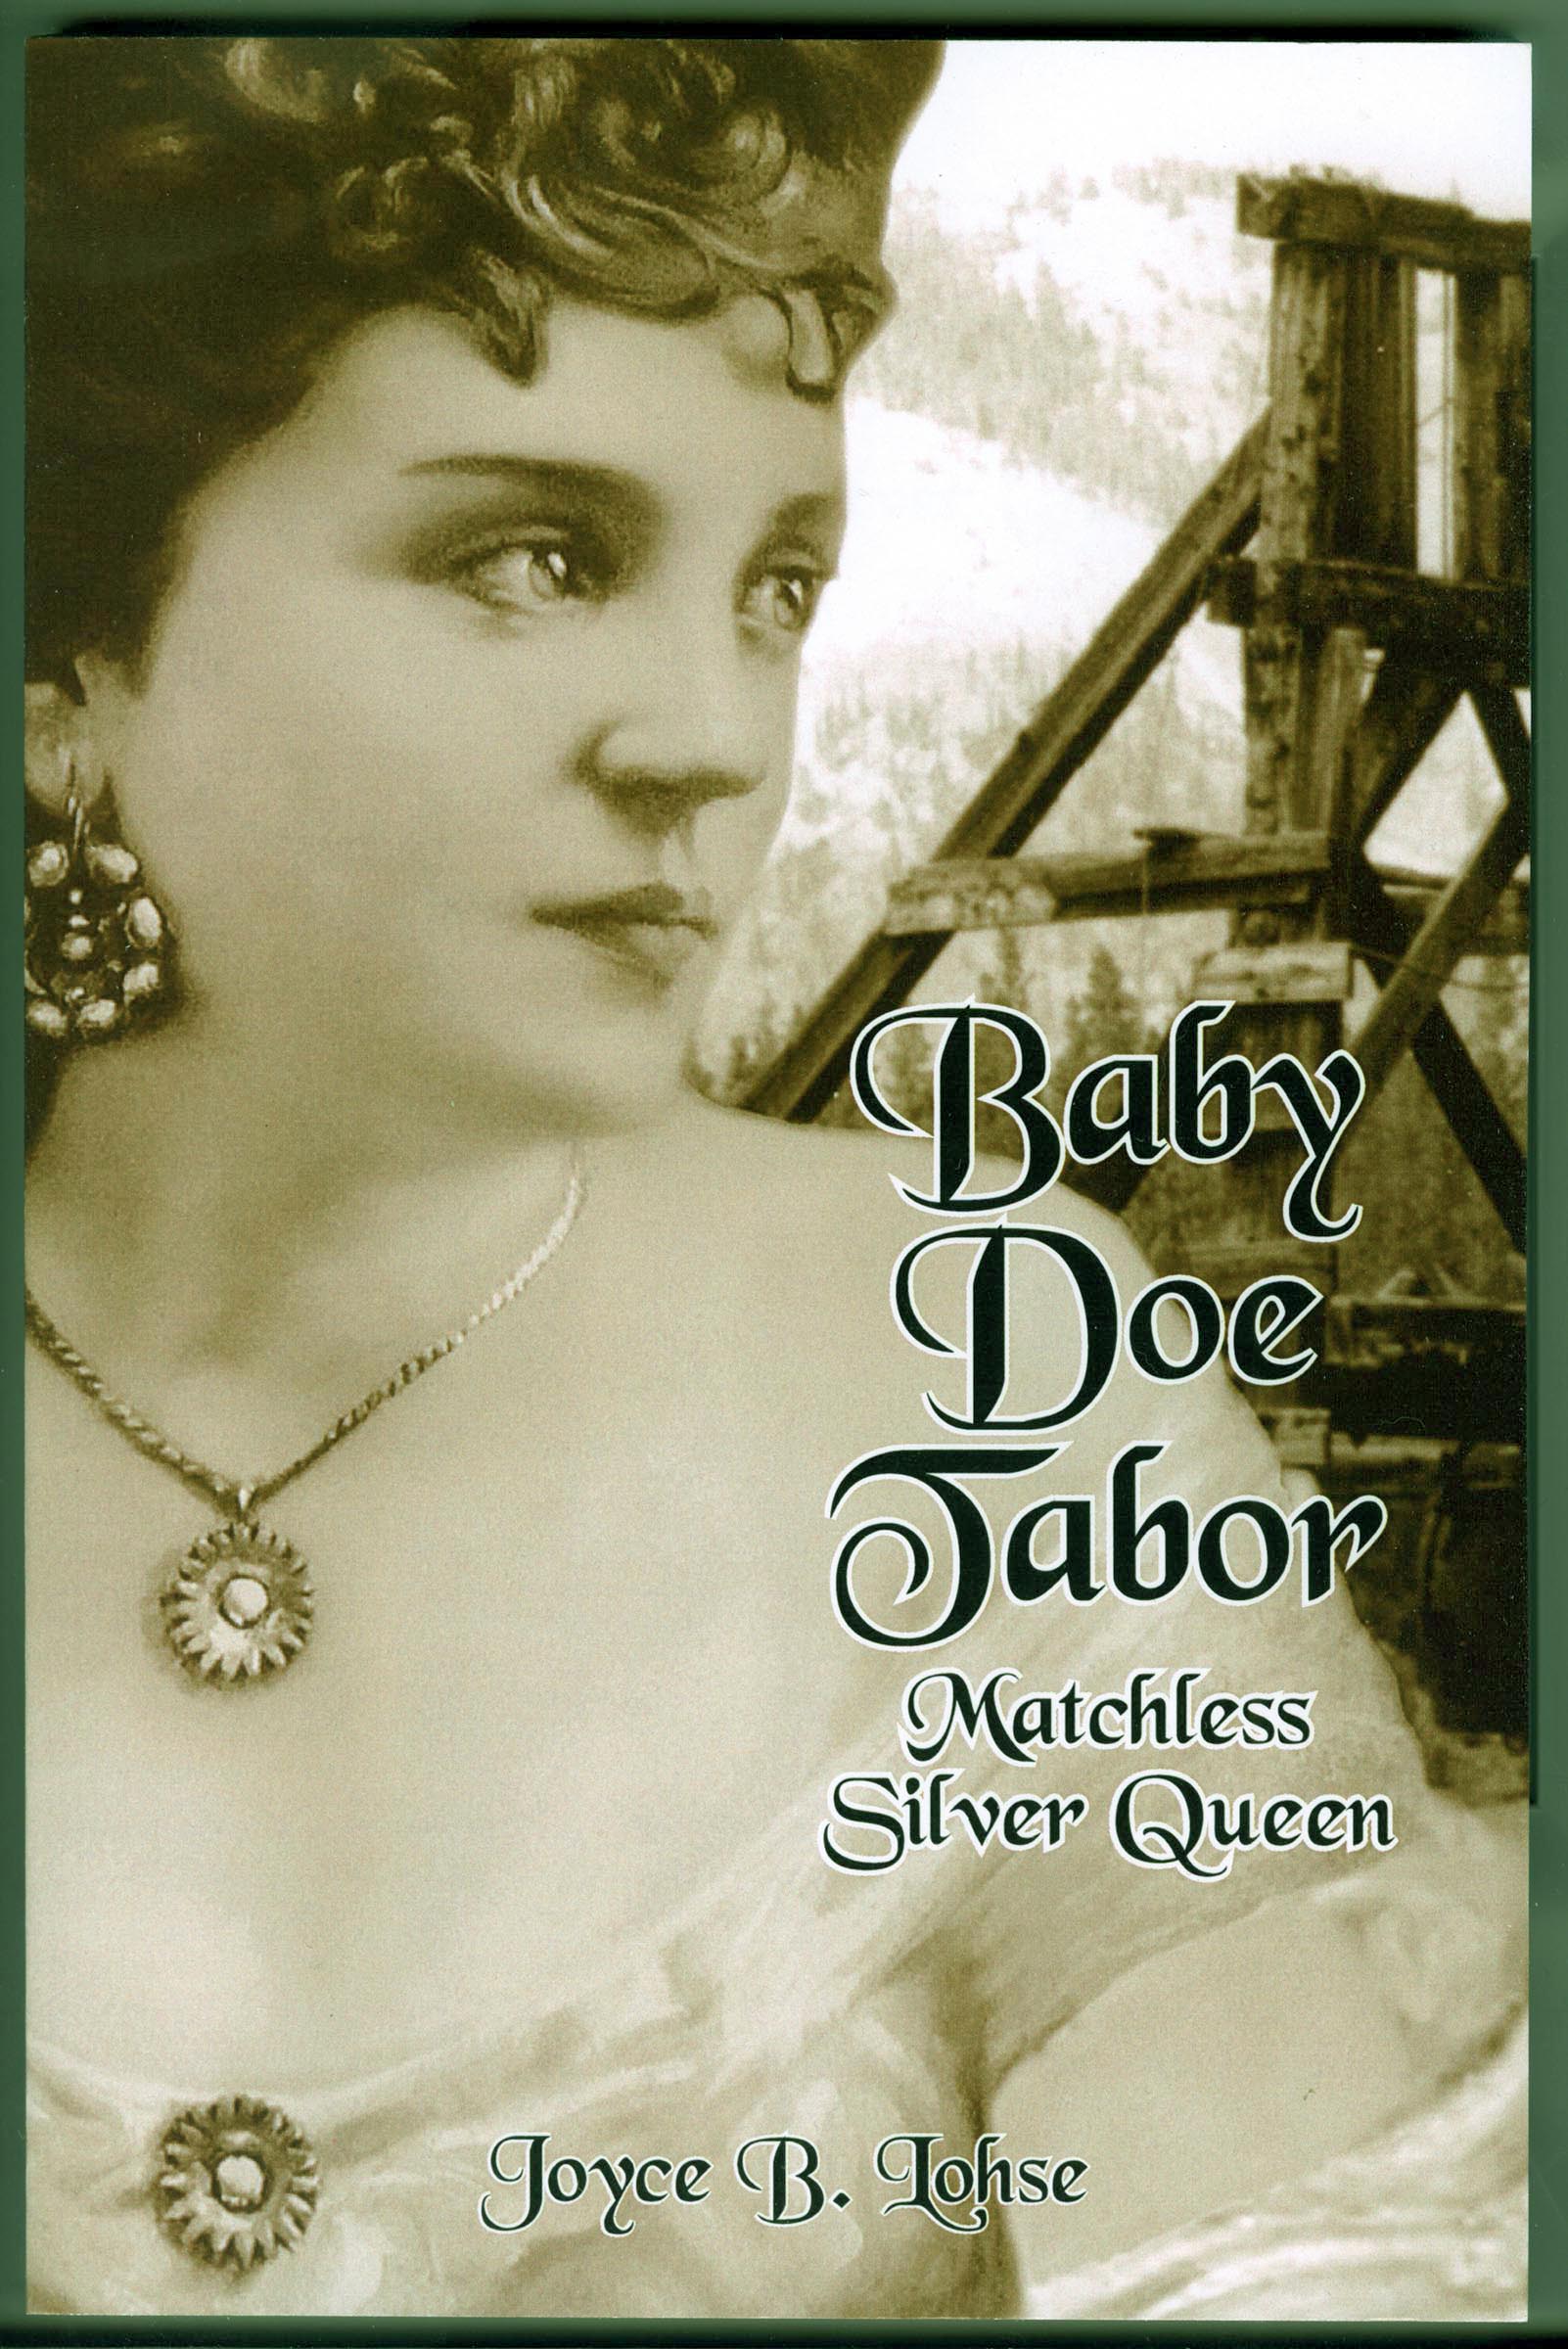 Baby Doe Tabor: Matchless Silver Queen